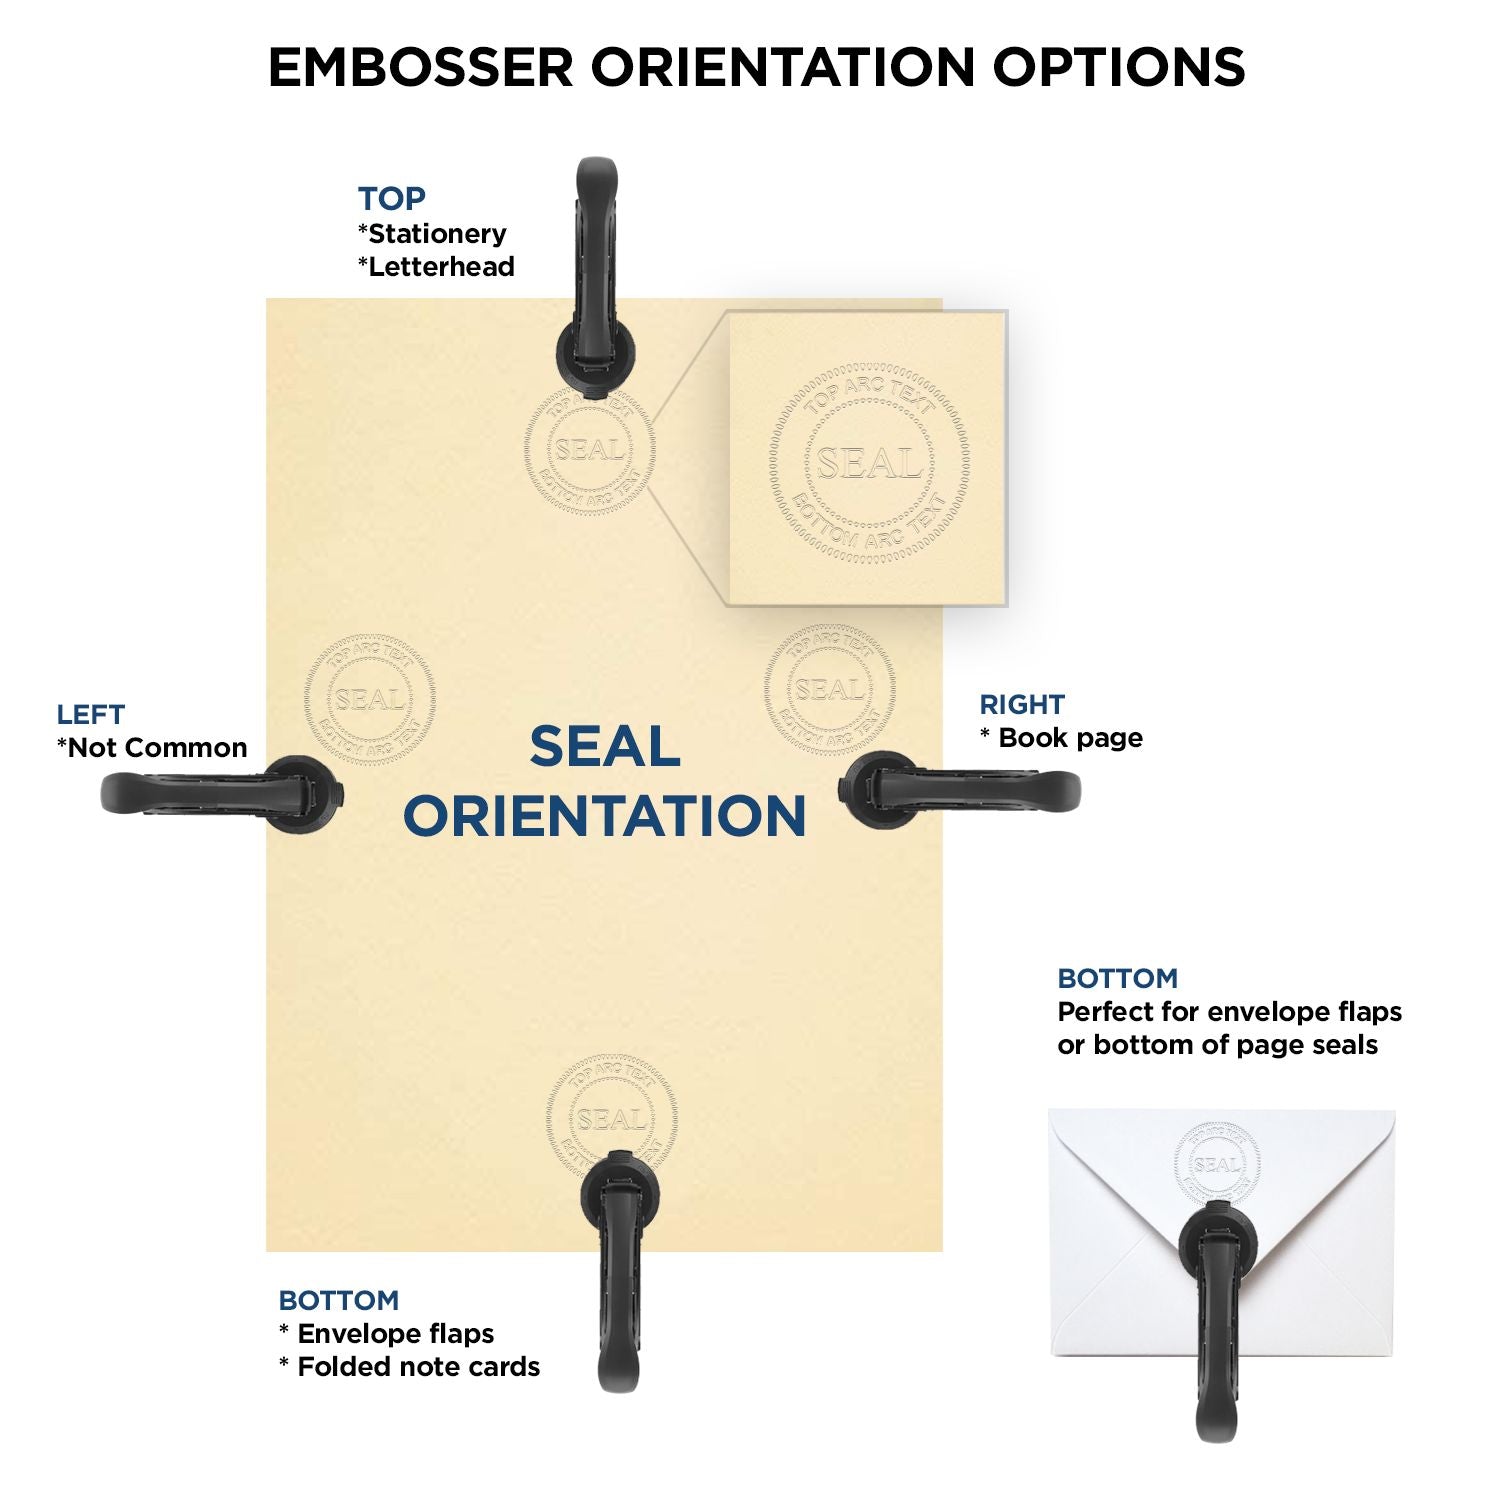 An infographic for the Long Reach Virginia Land Surveyor Seal showing embosser orientation, this is showing examples of a top, bottom, right and left insert.